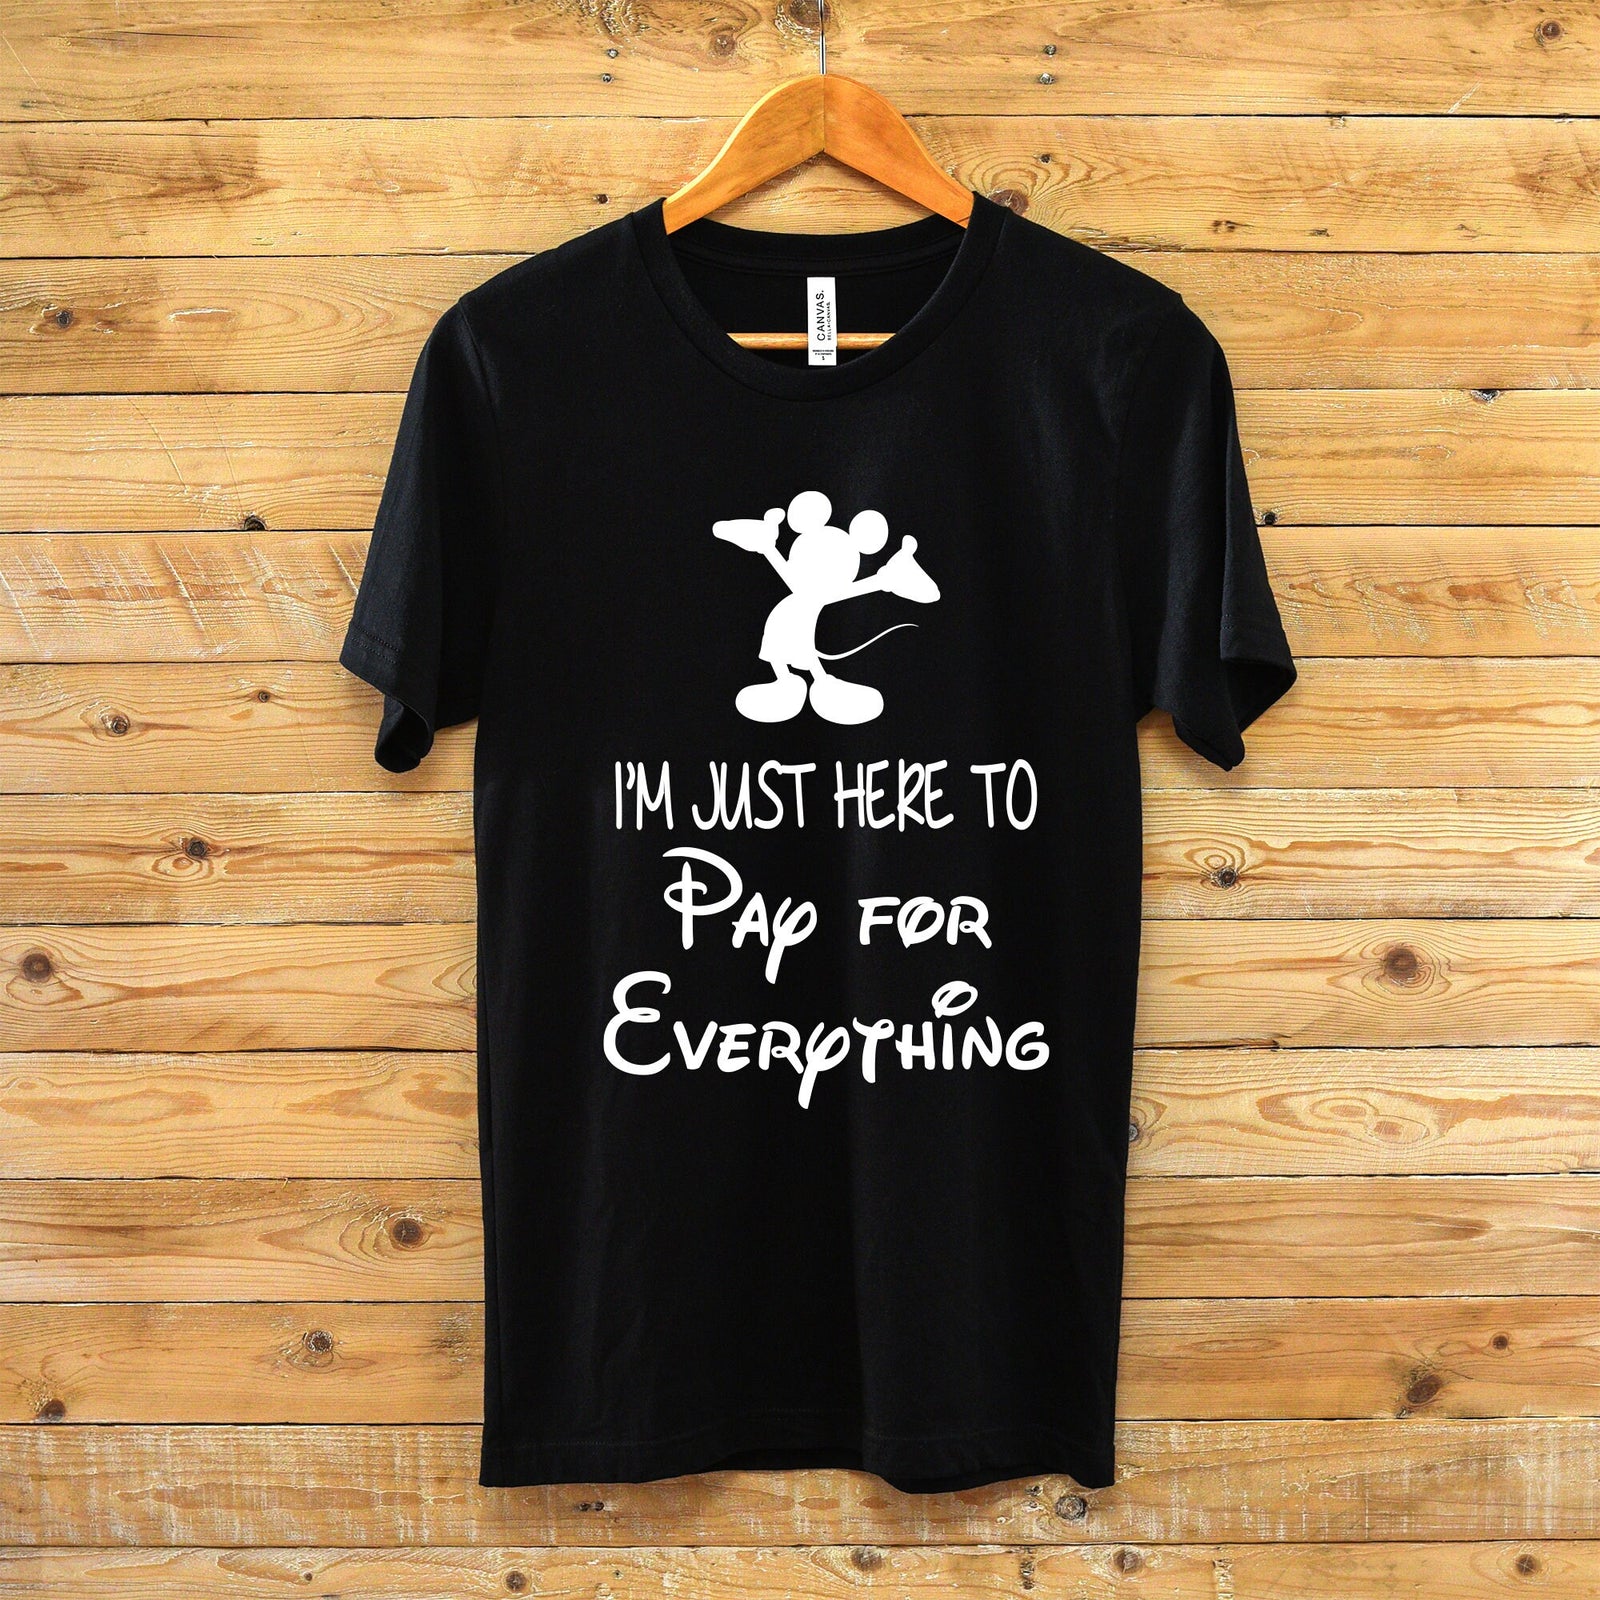 I'm Just Here to Pay for Everything T Shirt - Funny Disney Shirt - Mickey Tee - Funny Guy Disney Shirt